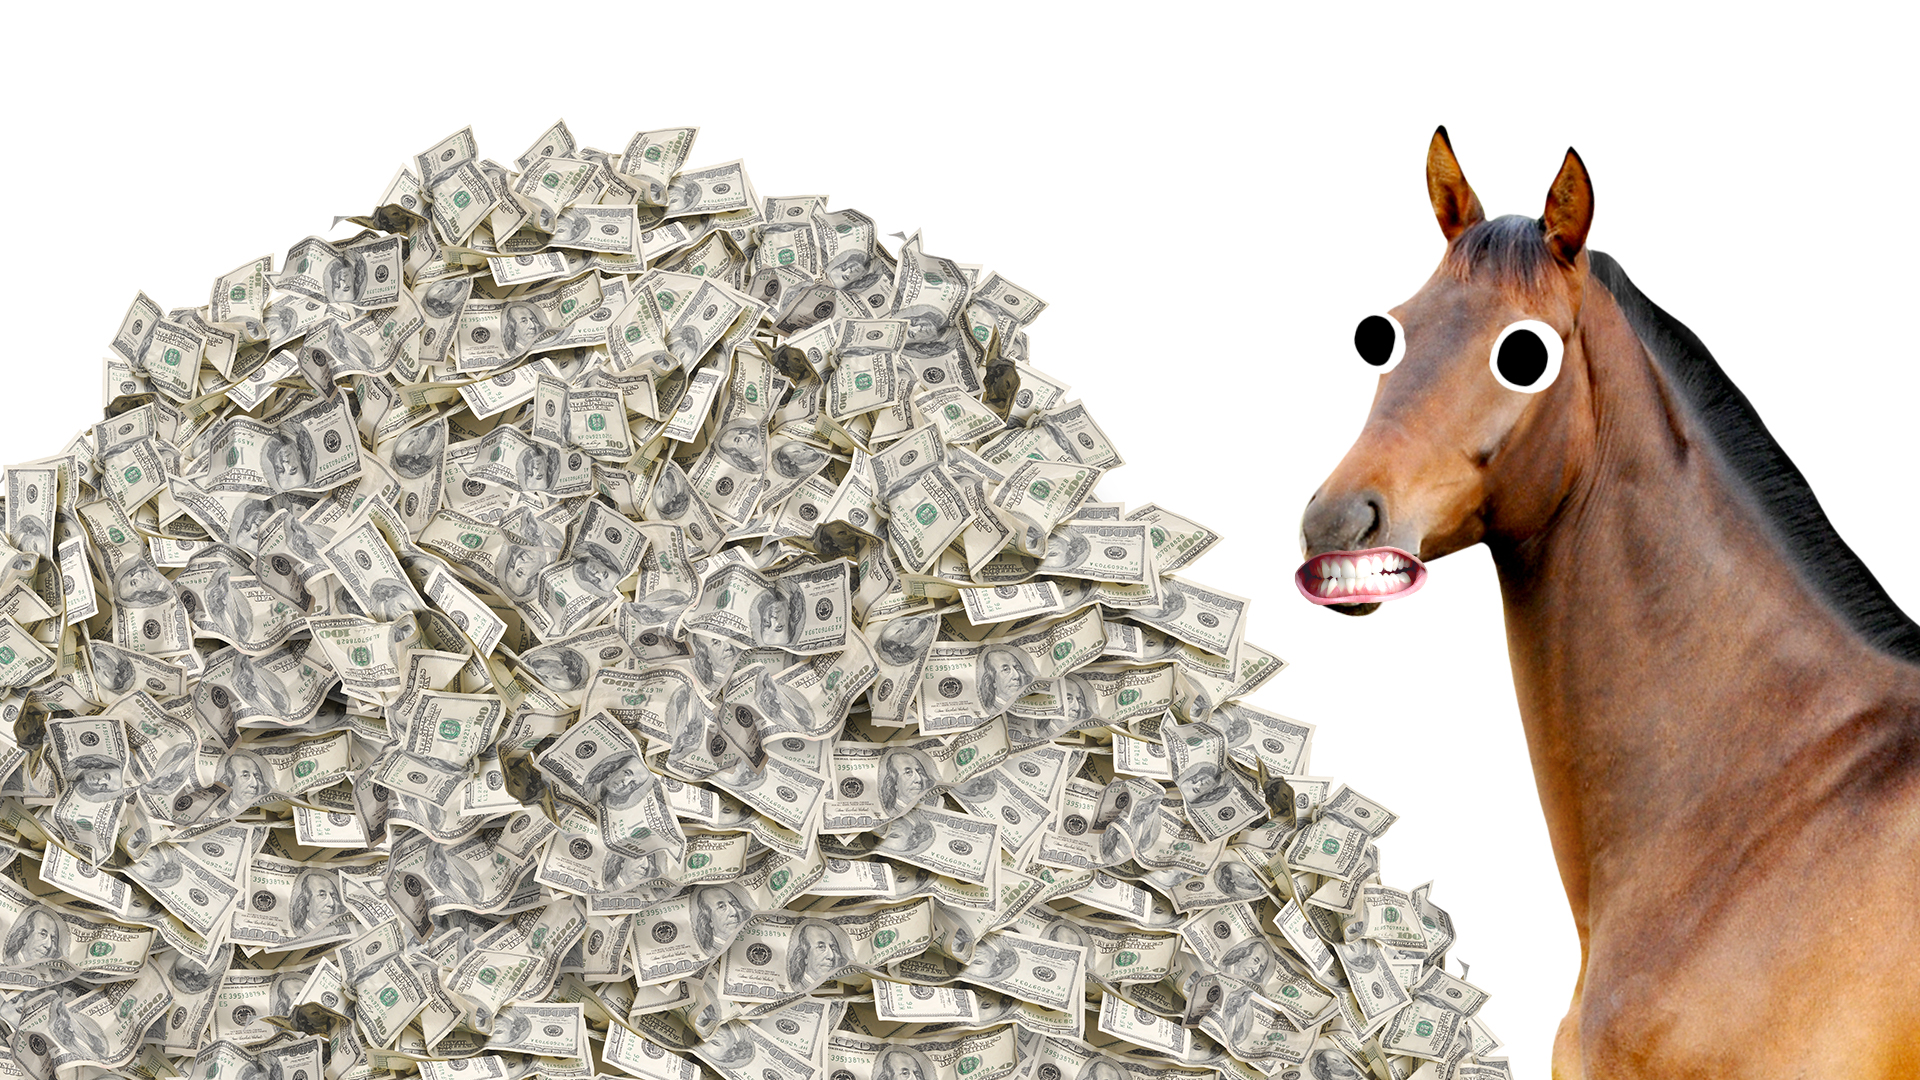 A horse next to a pile of money